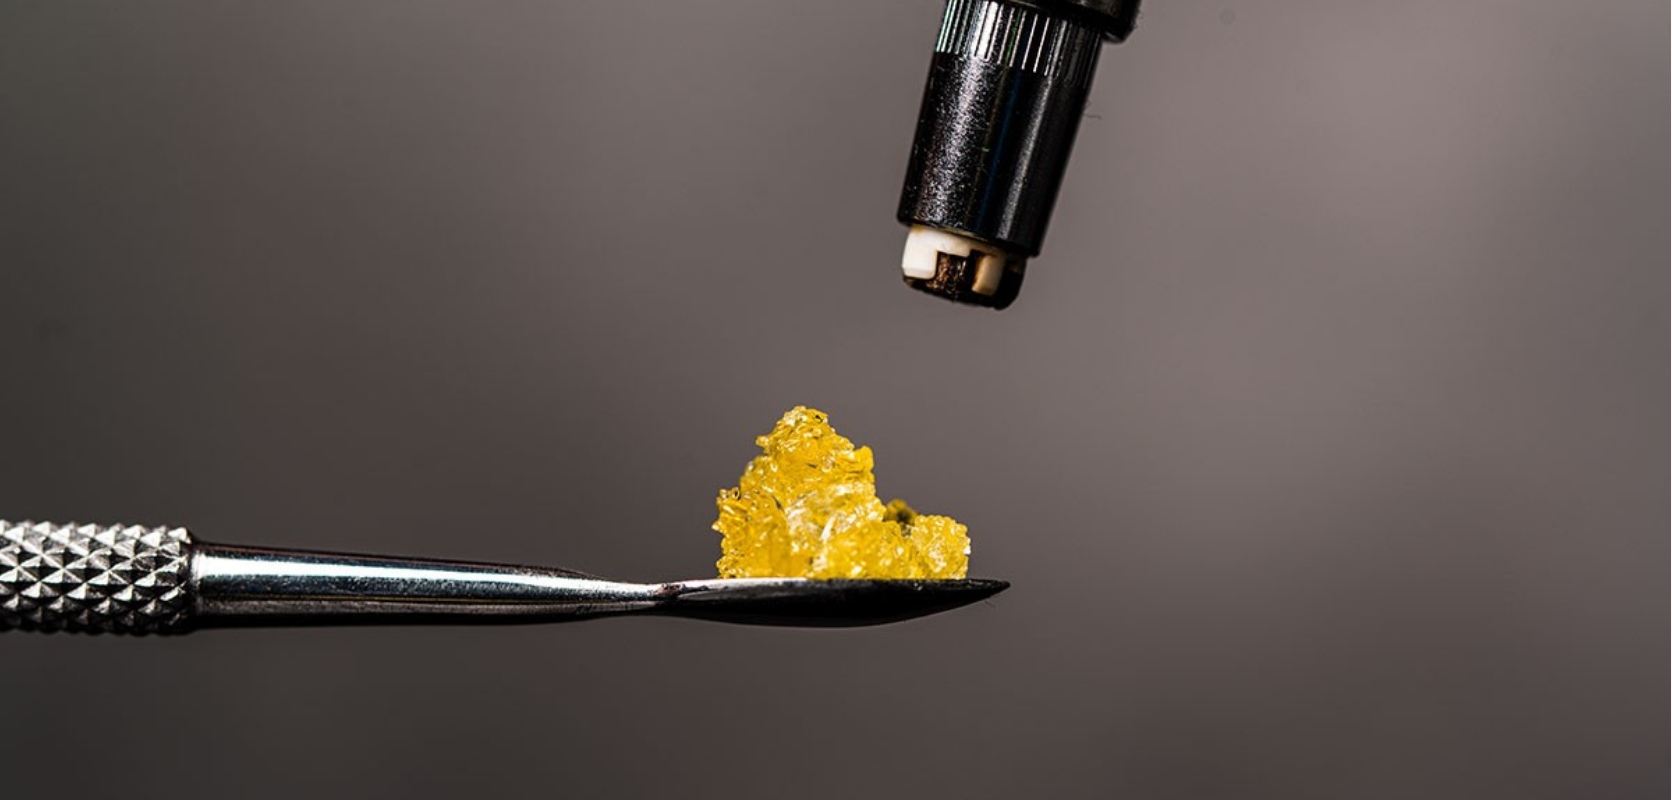 THC diamonds are a new-age gem that allows marijuana enthusiasts to get very high in a very short amount of time. But are THC diamonds worth it?